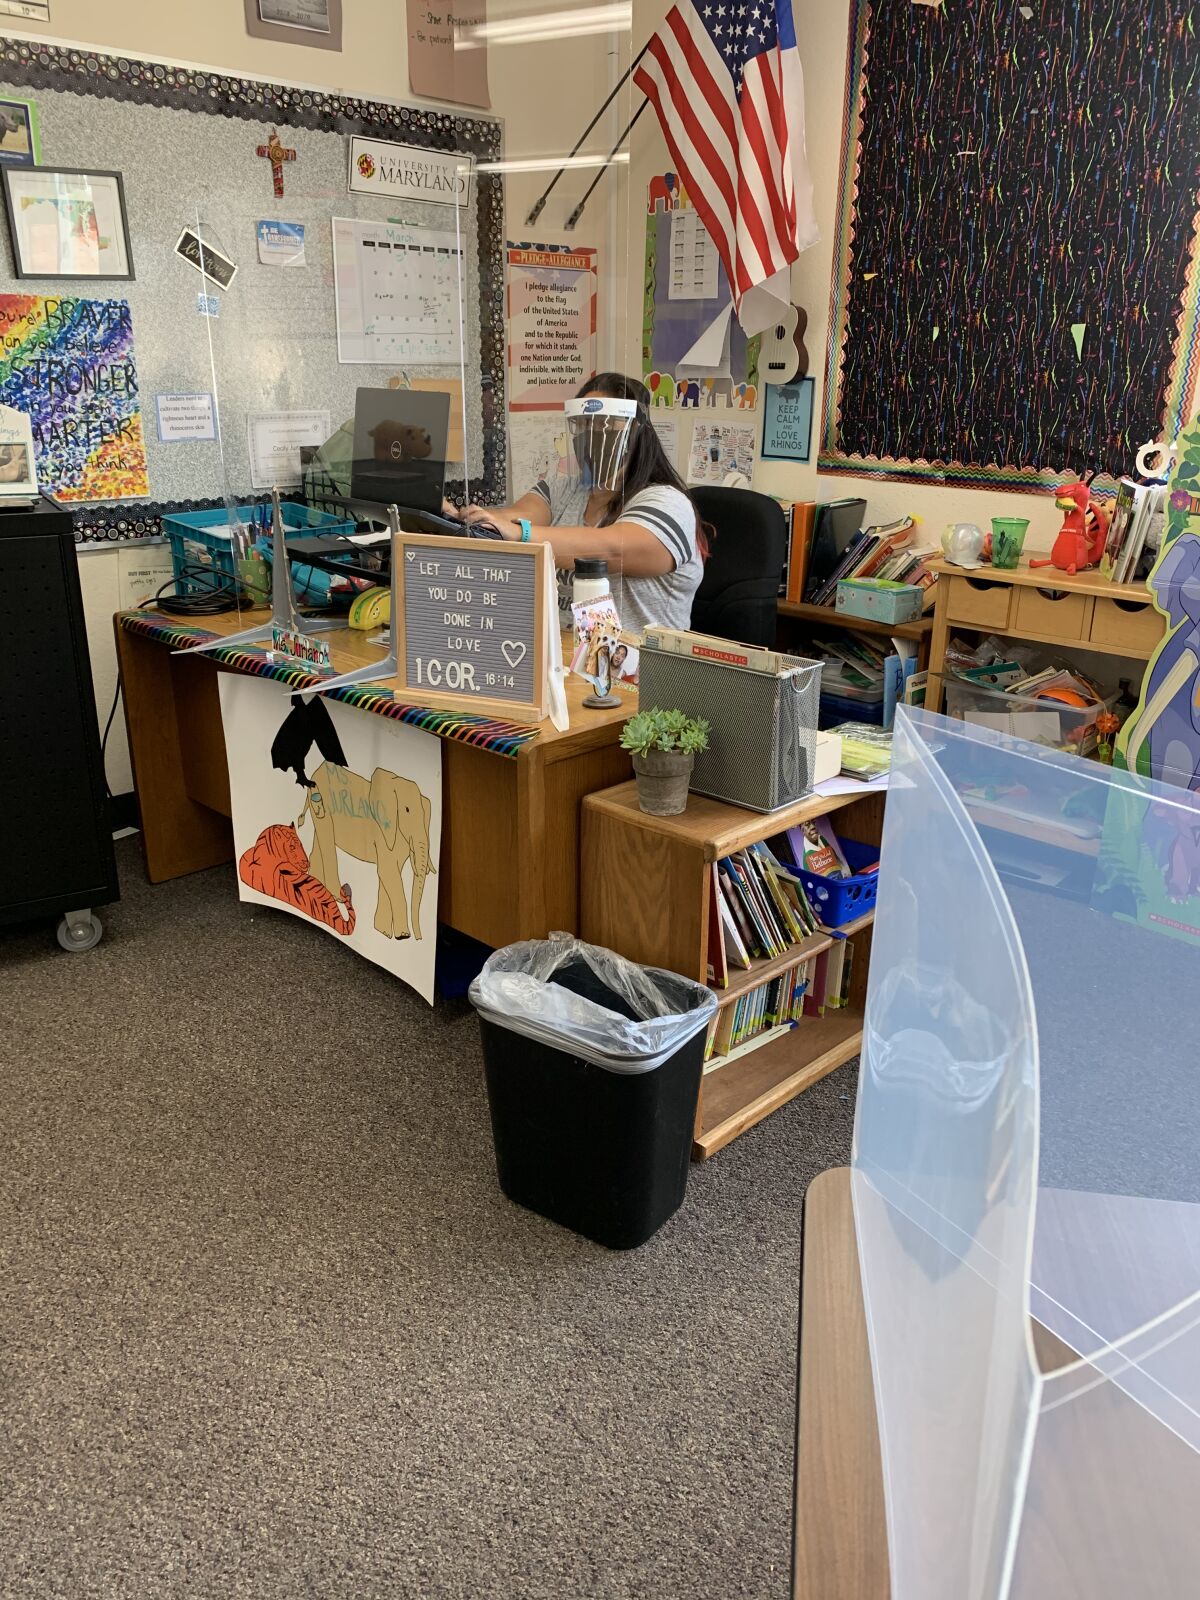 All teachers at St. Paul's Lutheran School in Pacific Beach will have plexiglass shields in front of their desks.